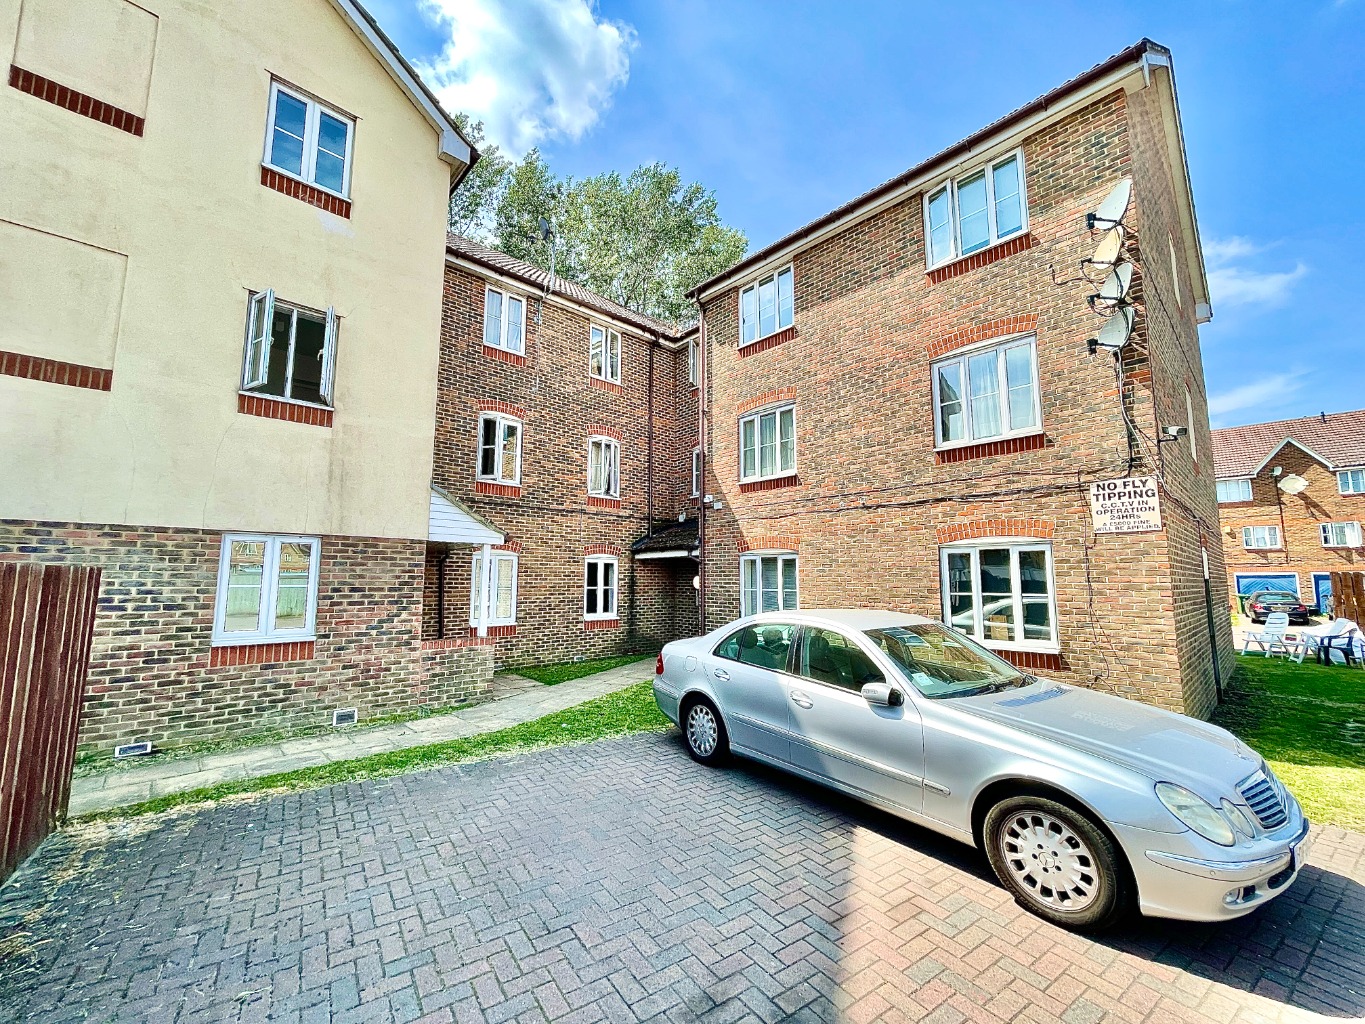 The flat is nicely presented internally and is situated in Thamesmead.